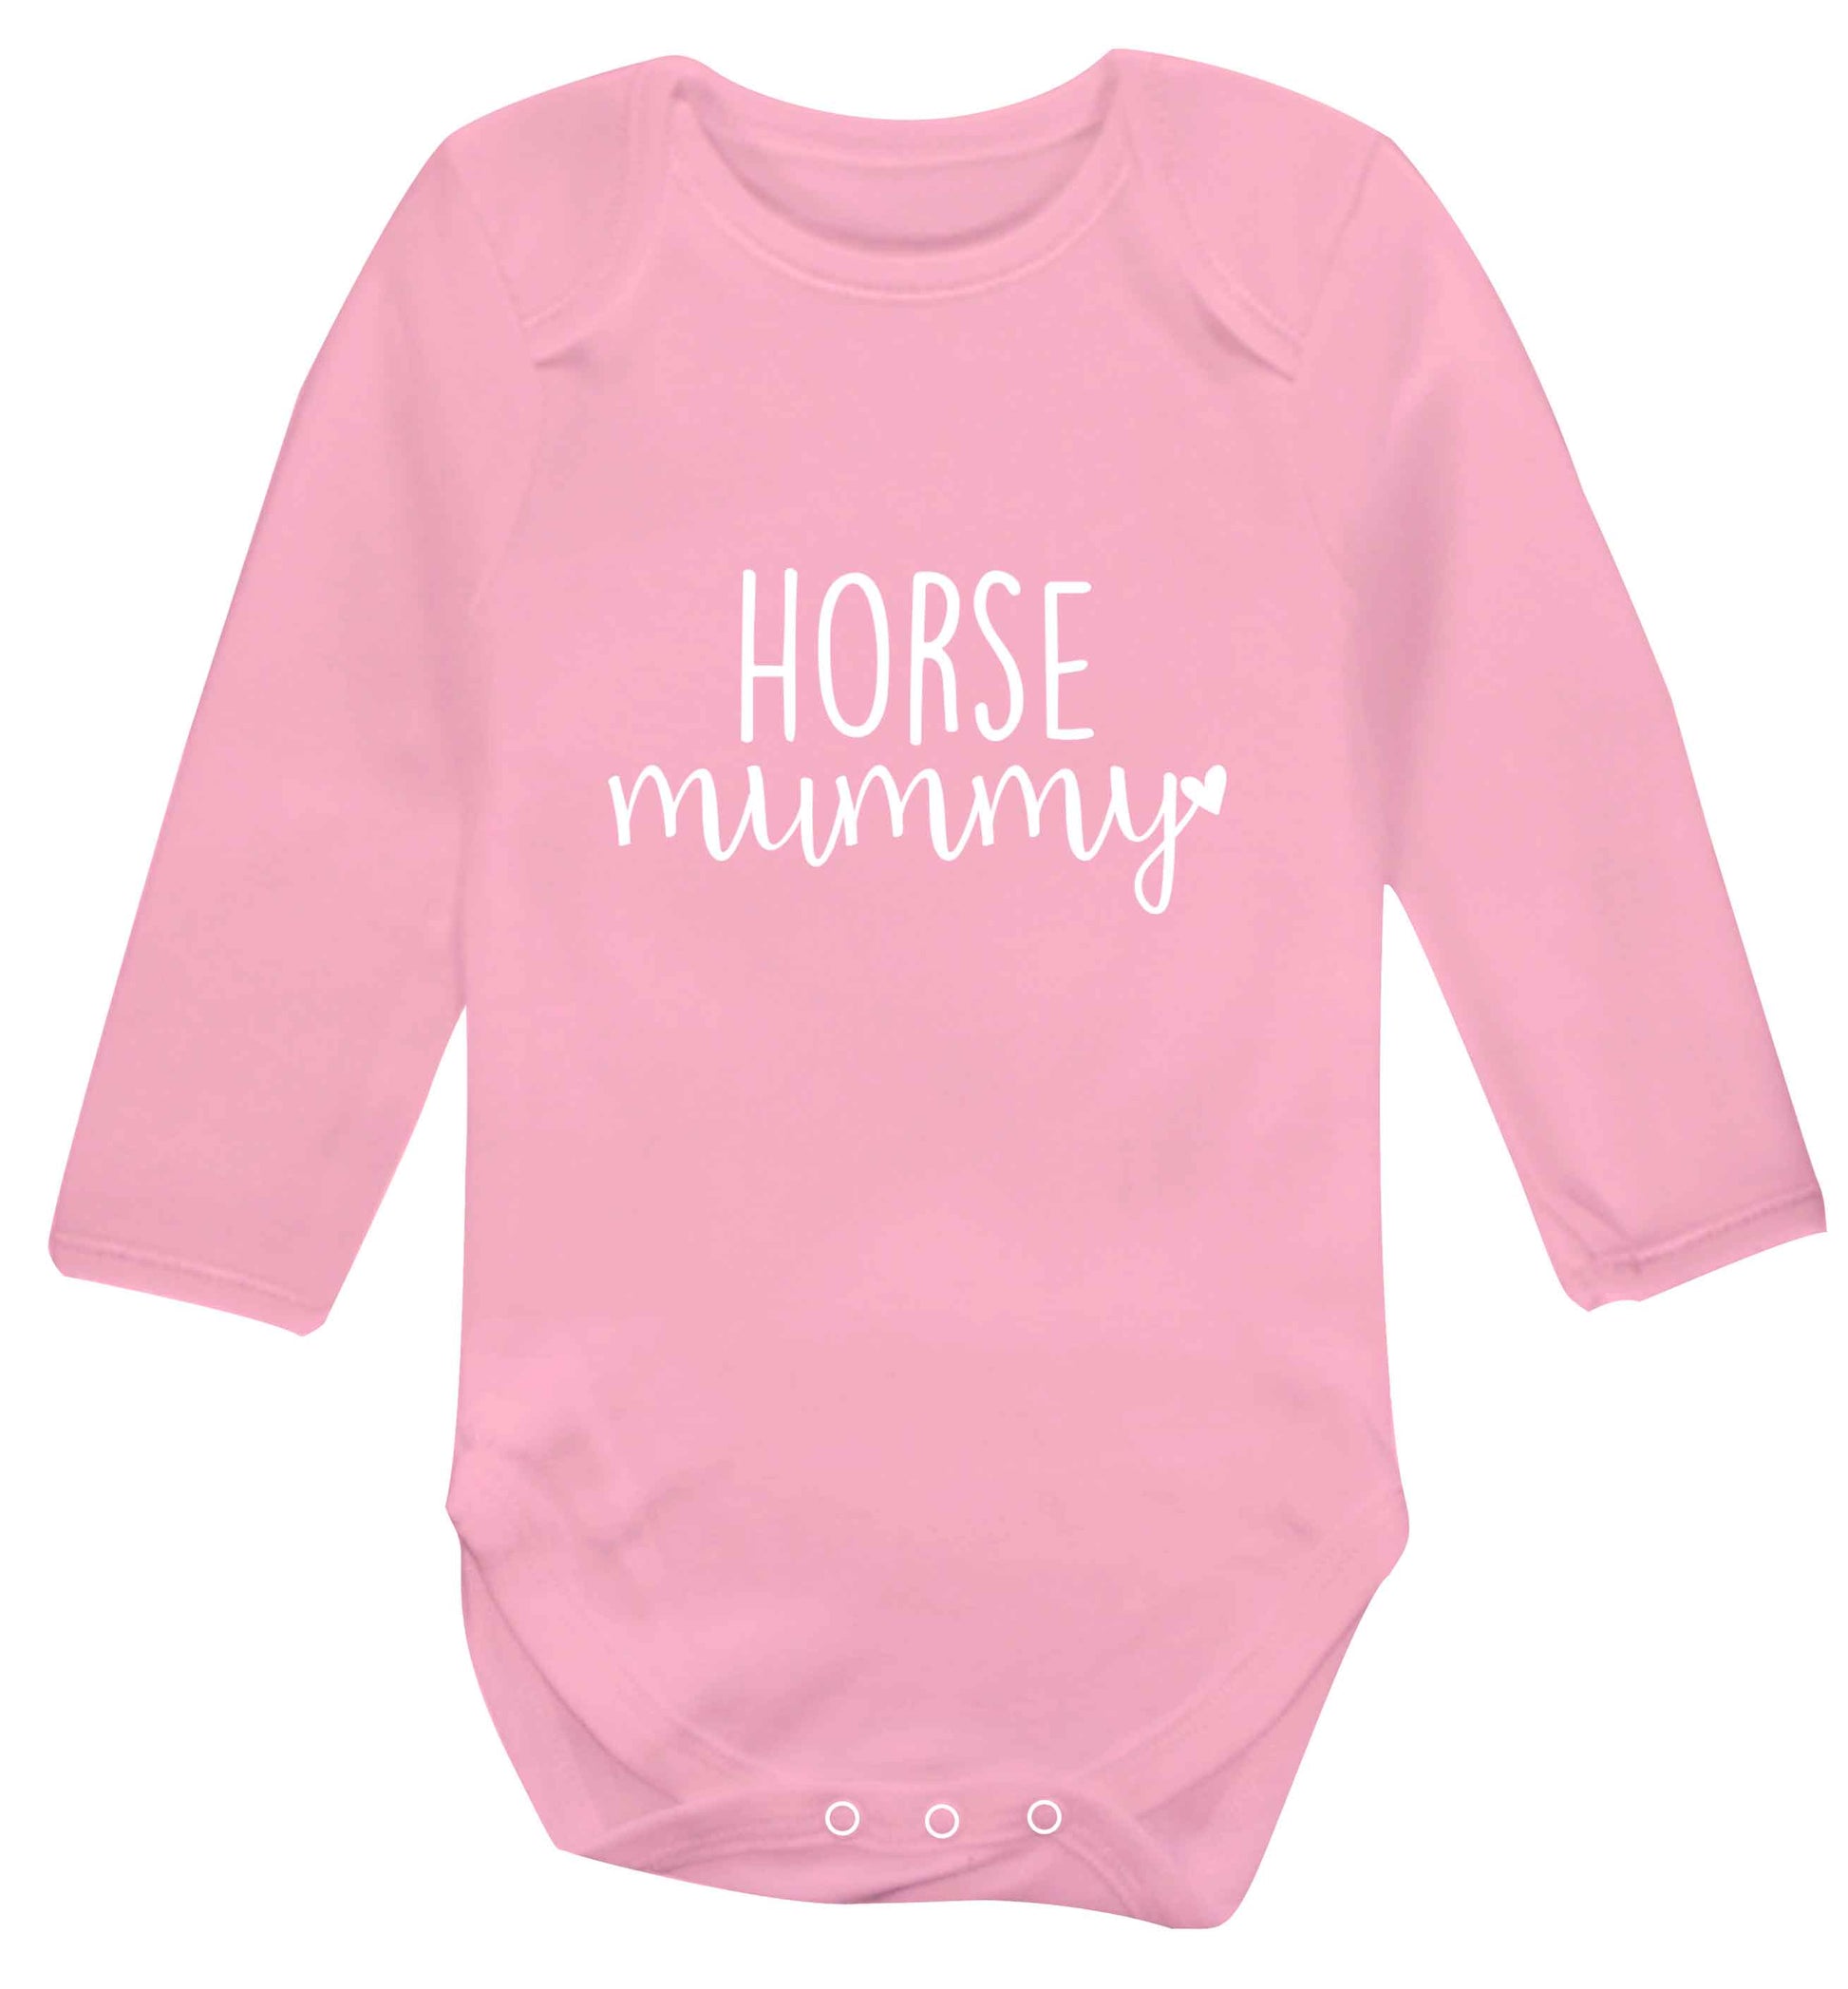 Horse mummy baby vest long sleeved pale pink 6-12 months